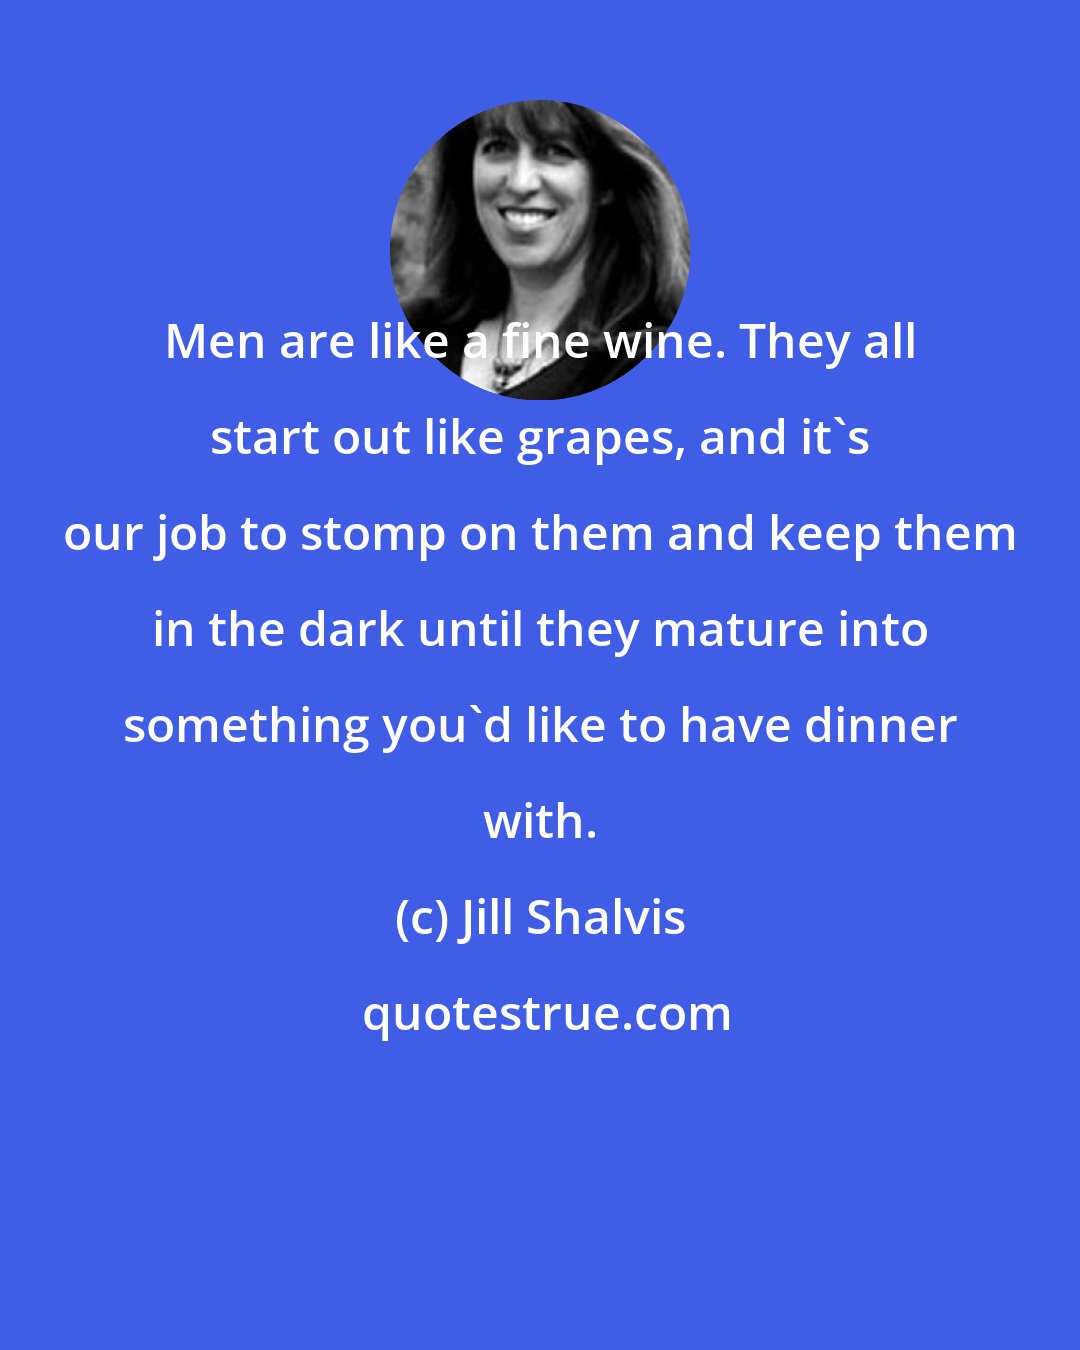 Jill Shalvis: Men are like a fine wine. They all start out like grapes, and it's our job to stomp on them and keep them in the dark until they mature into something you'd like to have dinner with.